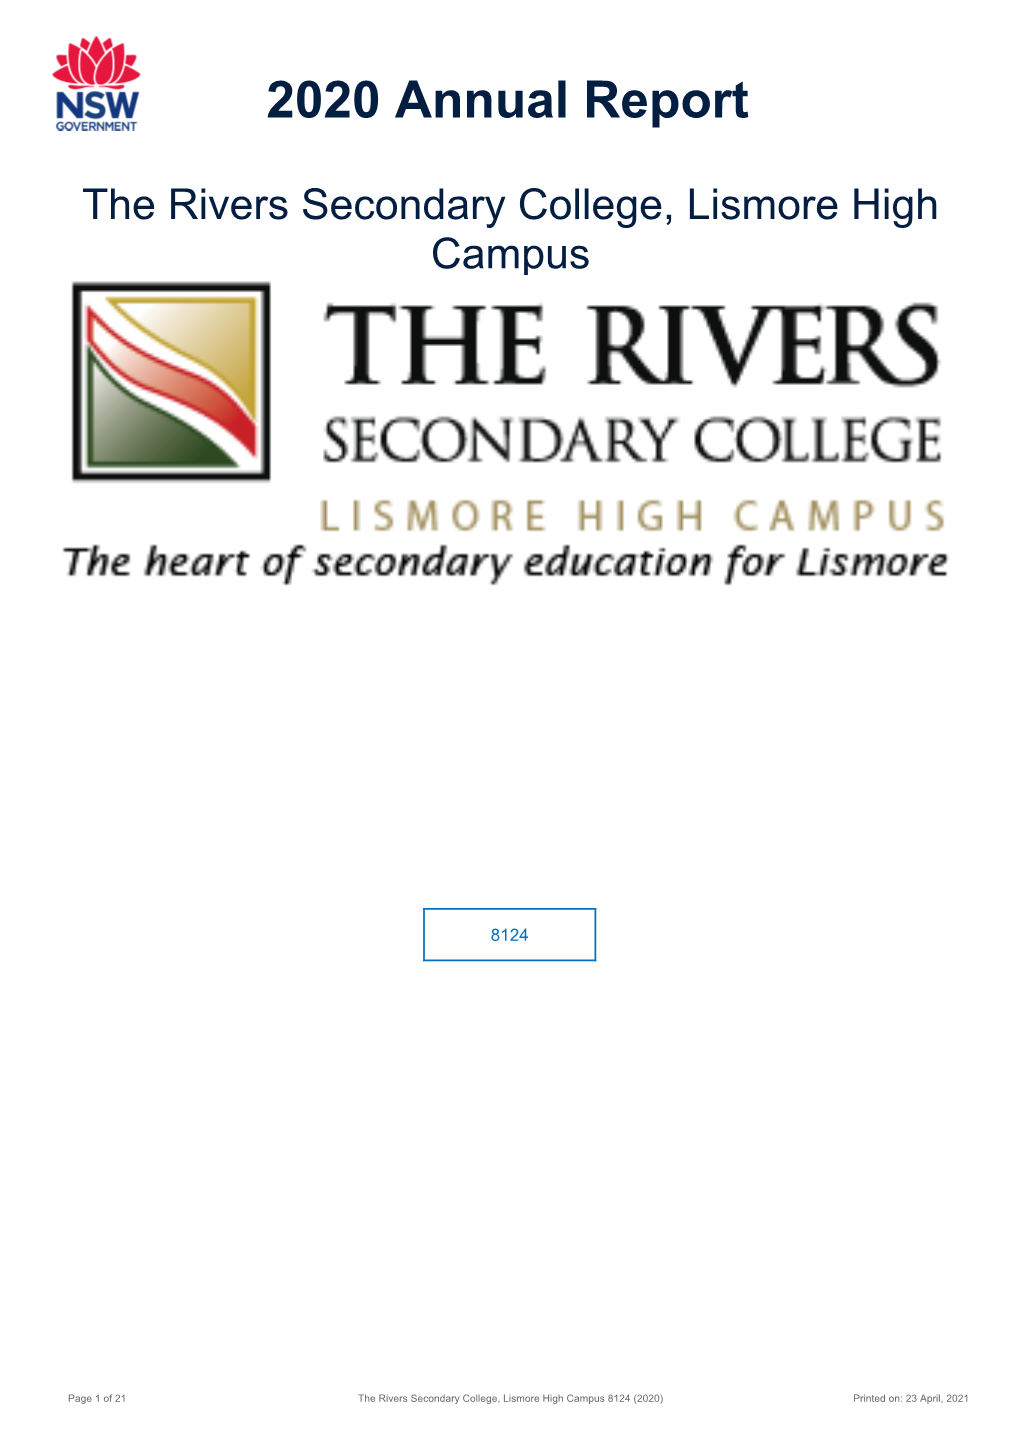 2020 the Rivers Secondary College, Lismore High Campus Annual Report